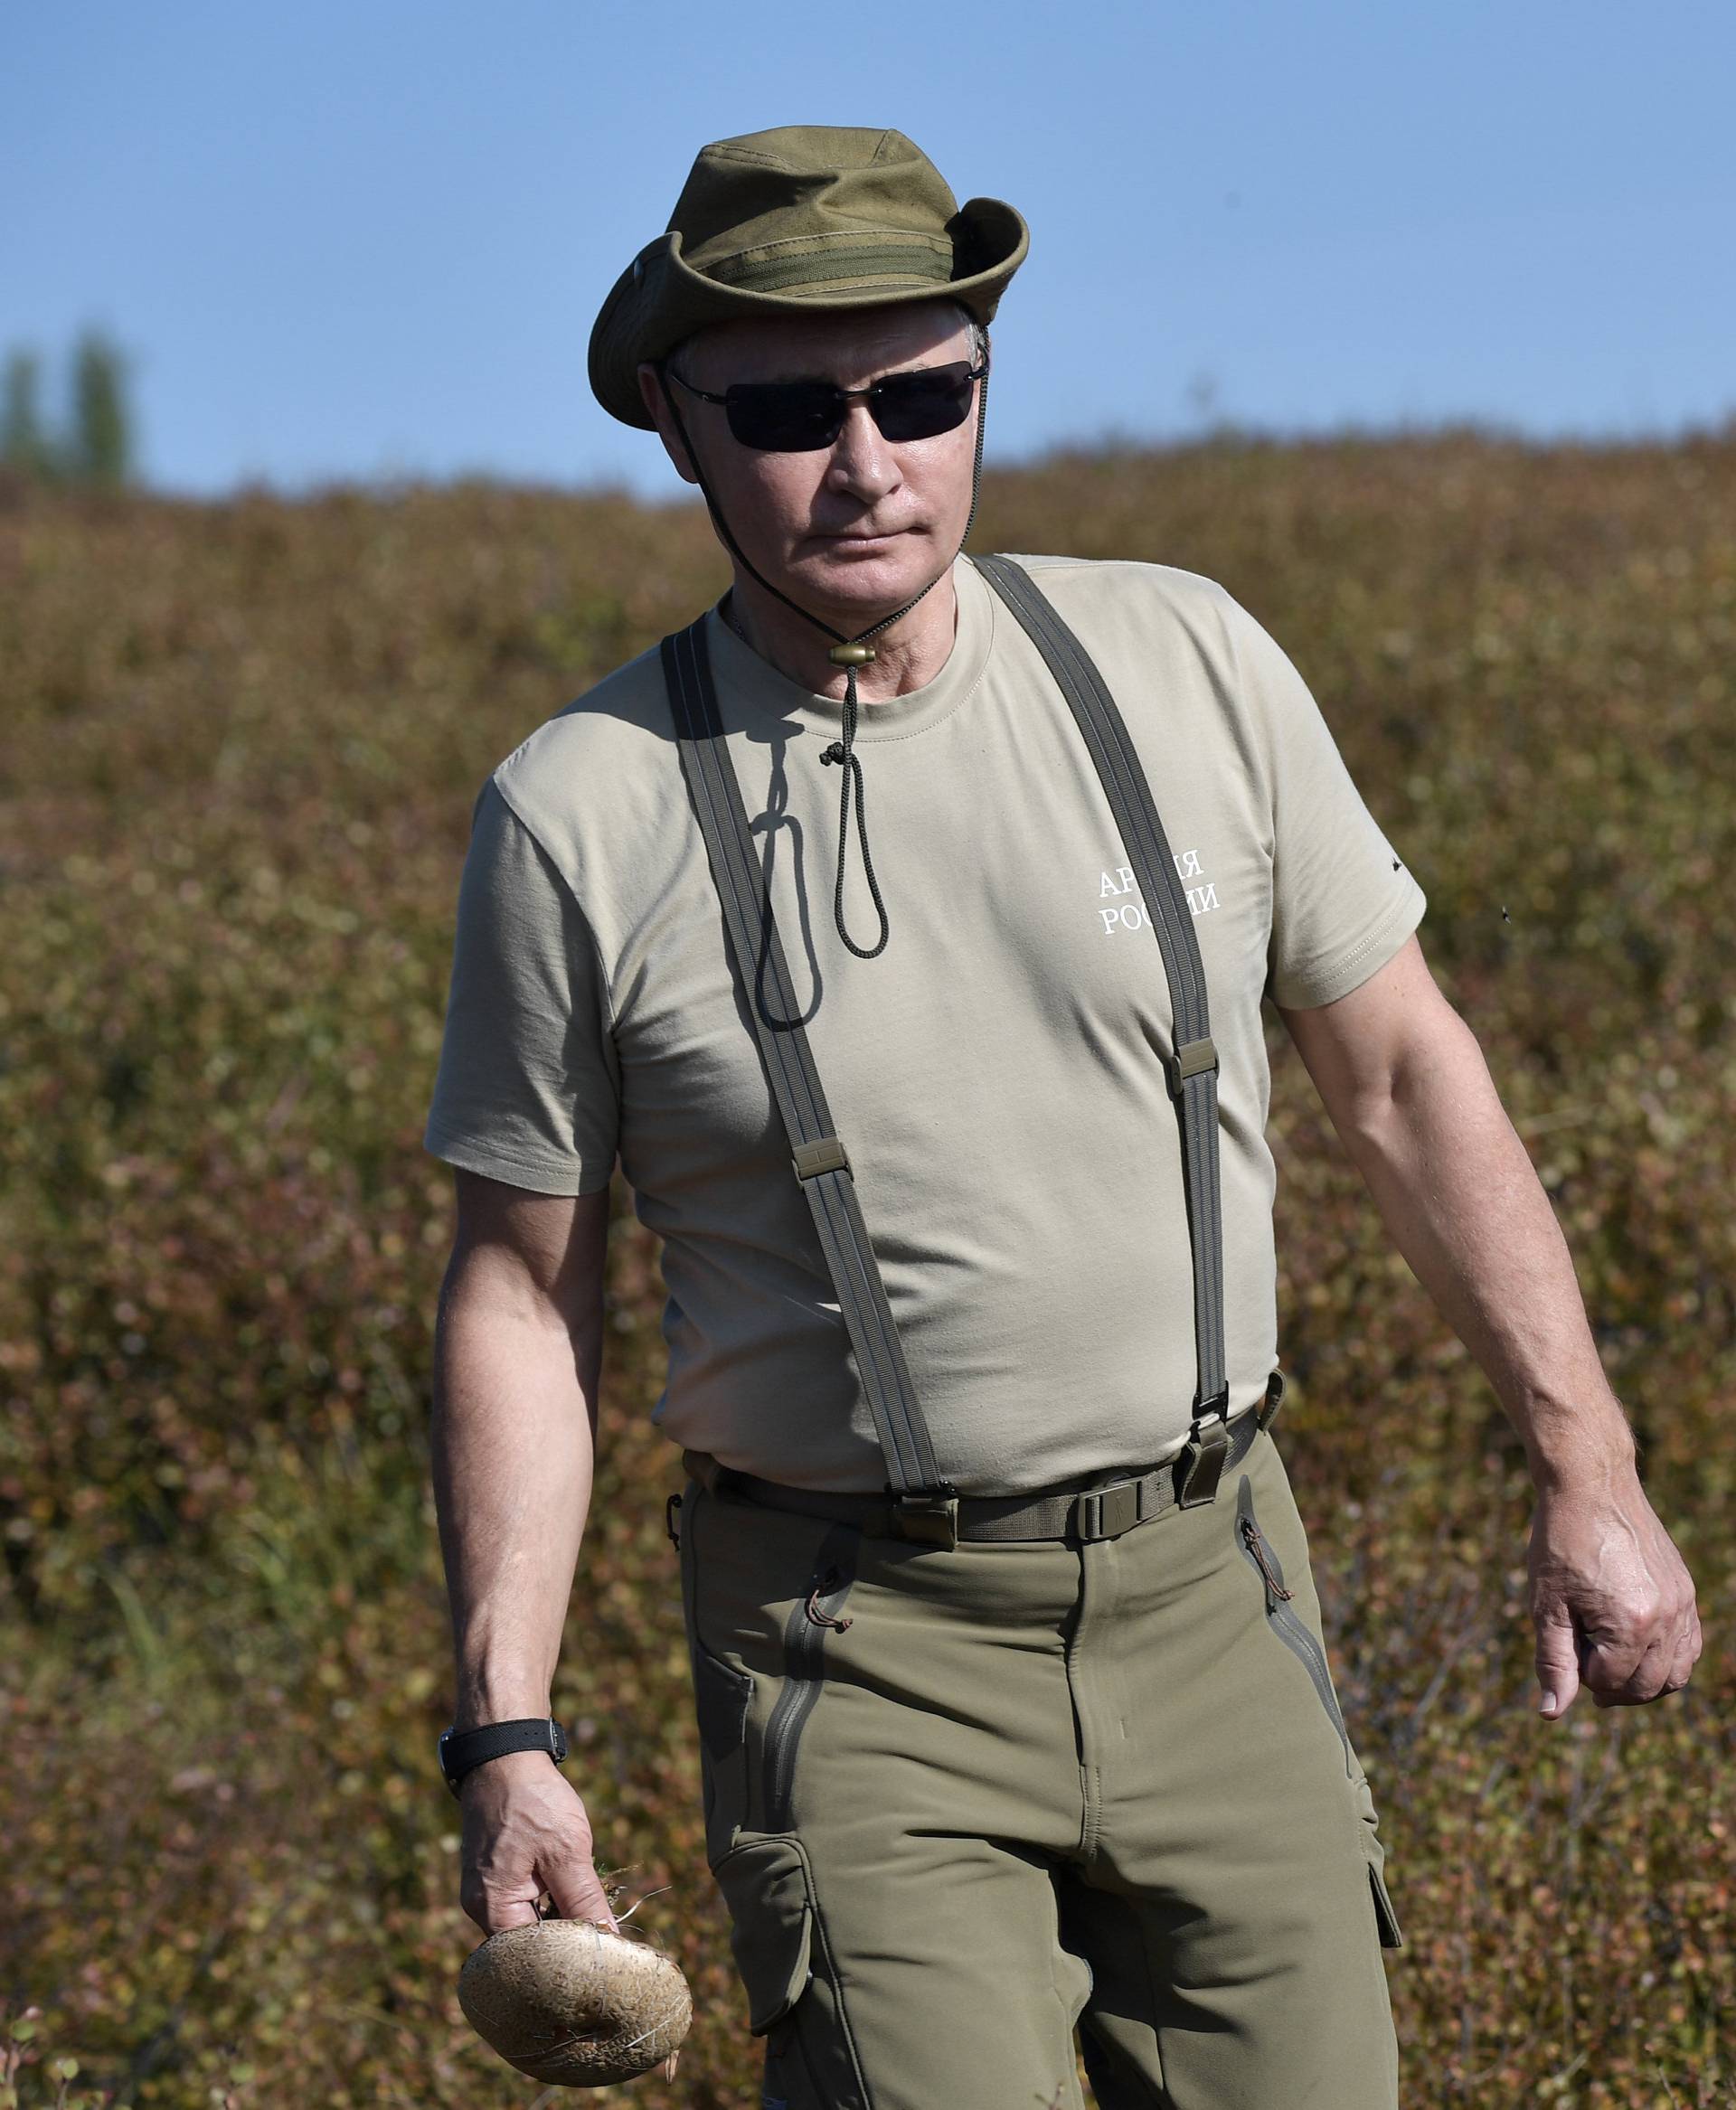 Russia's President Putin is seen during his vacation in the Republic of Tyva